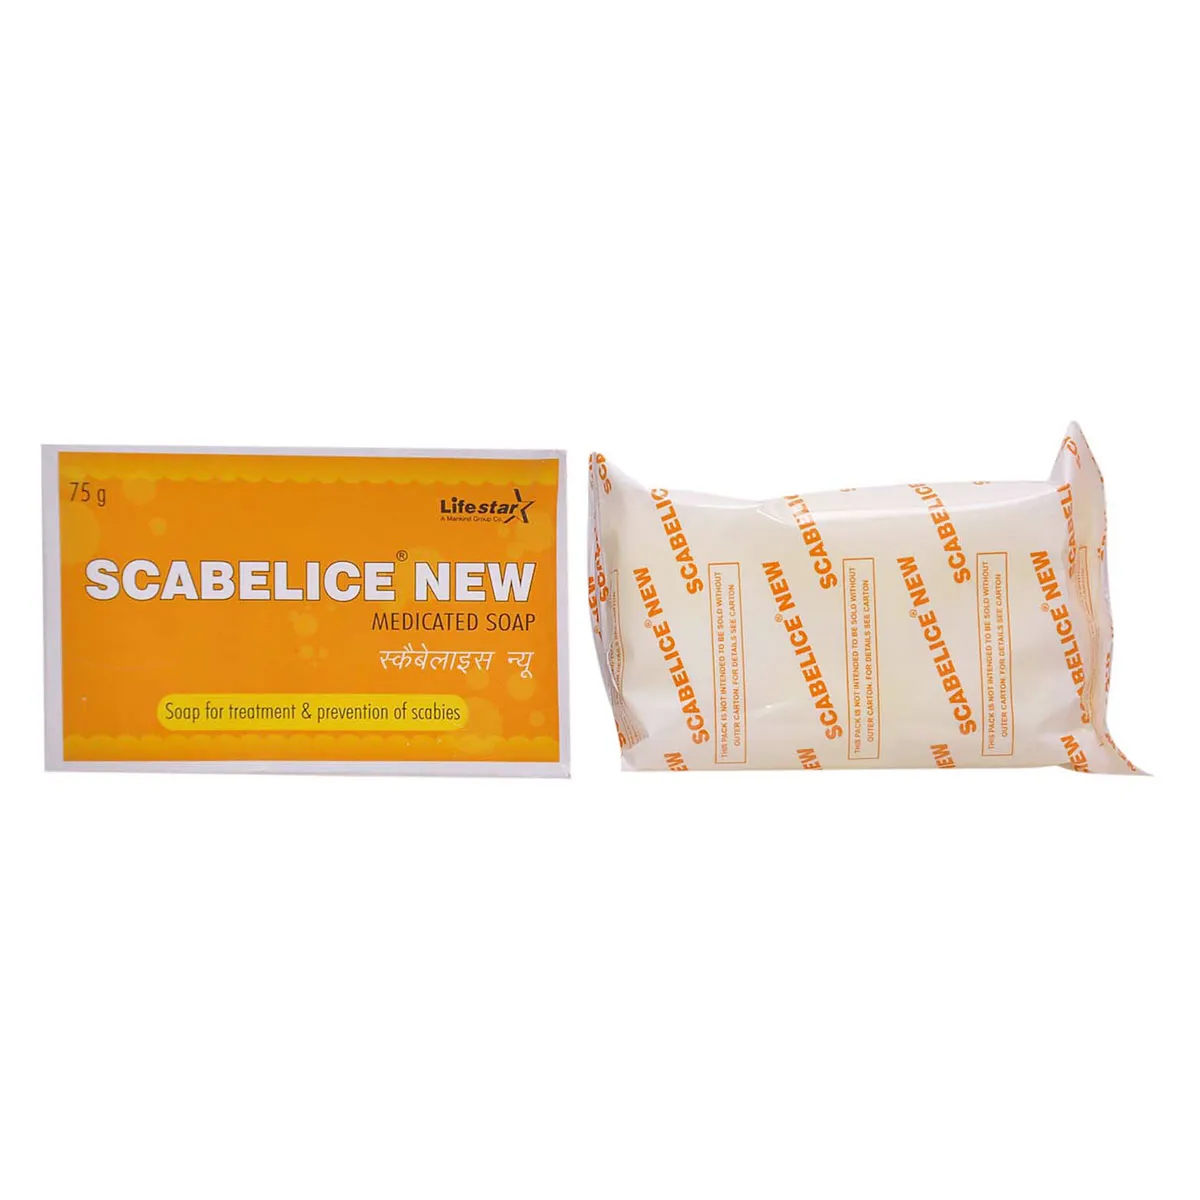 Scabelice New Medicated Soap